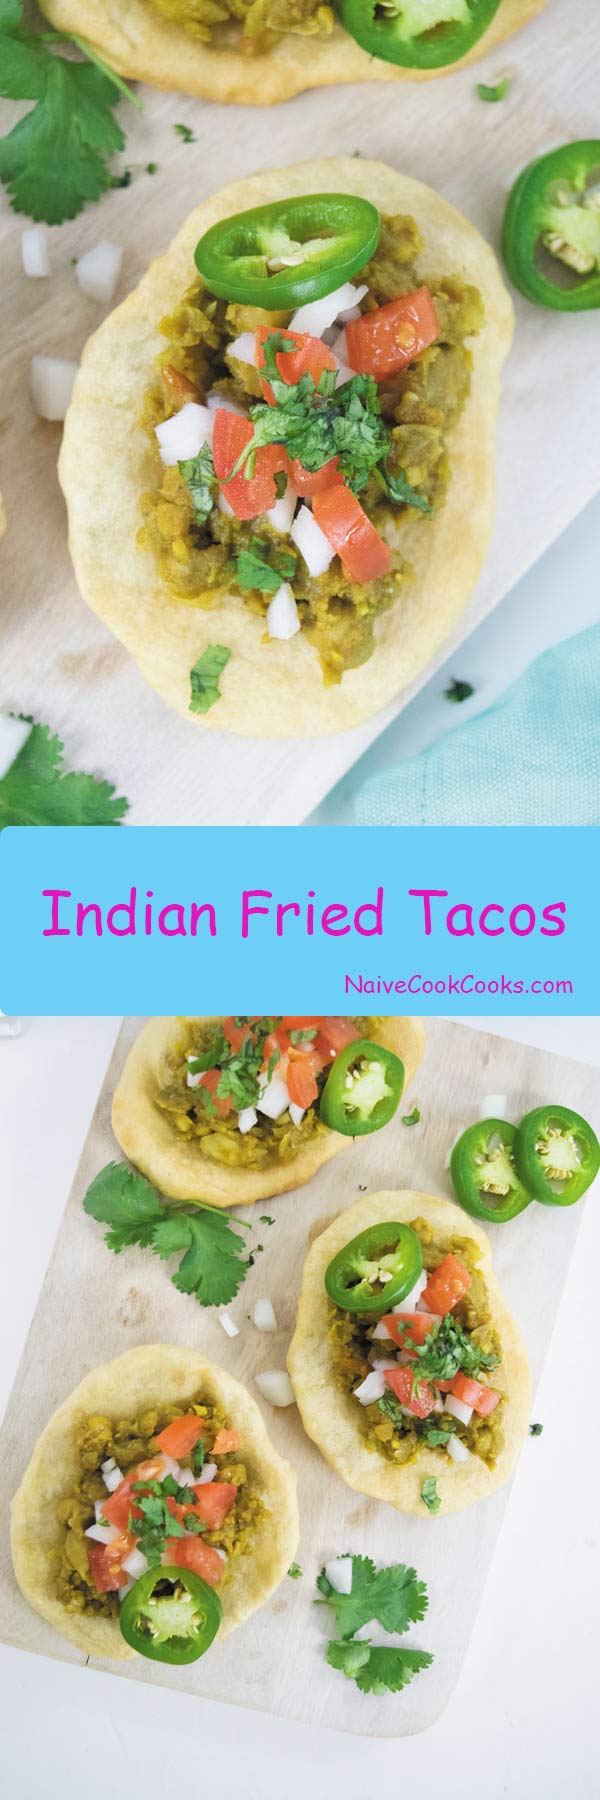 Indian Fried Tacos 1